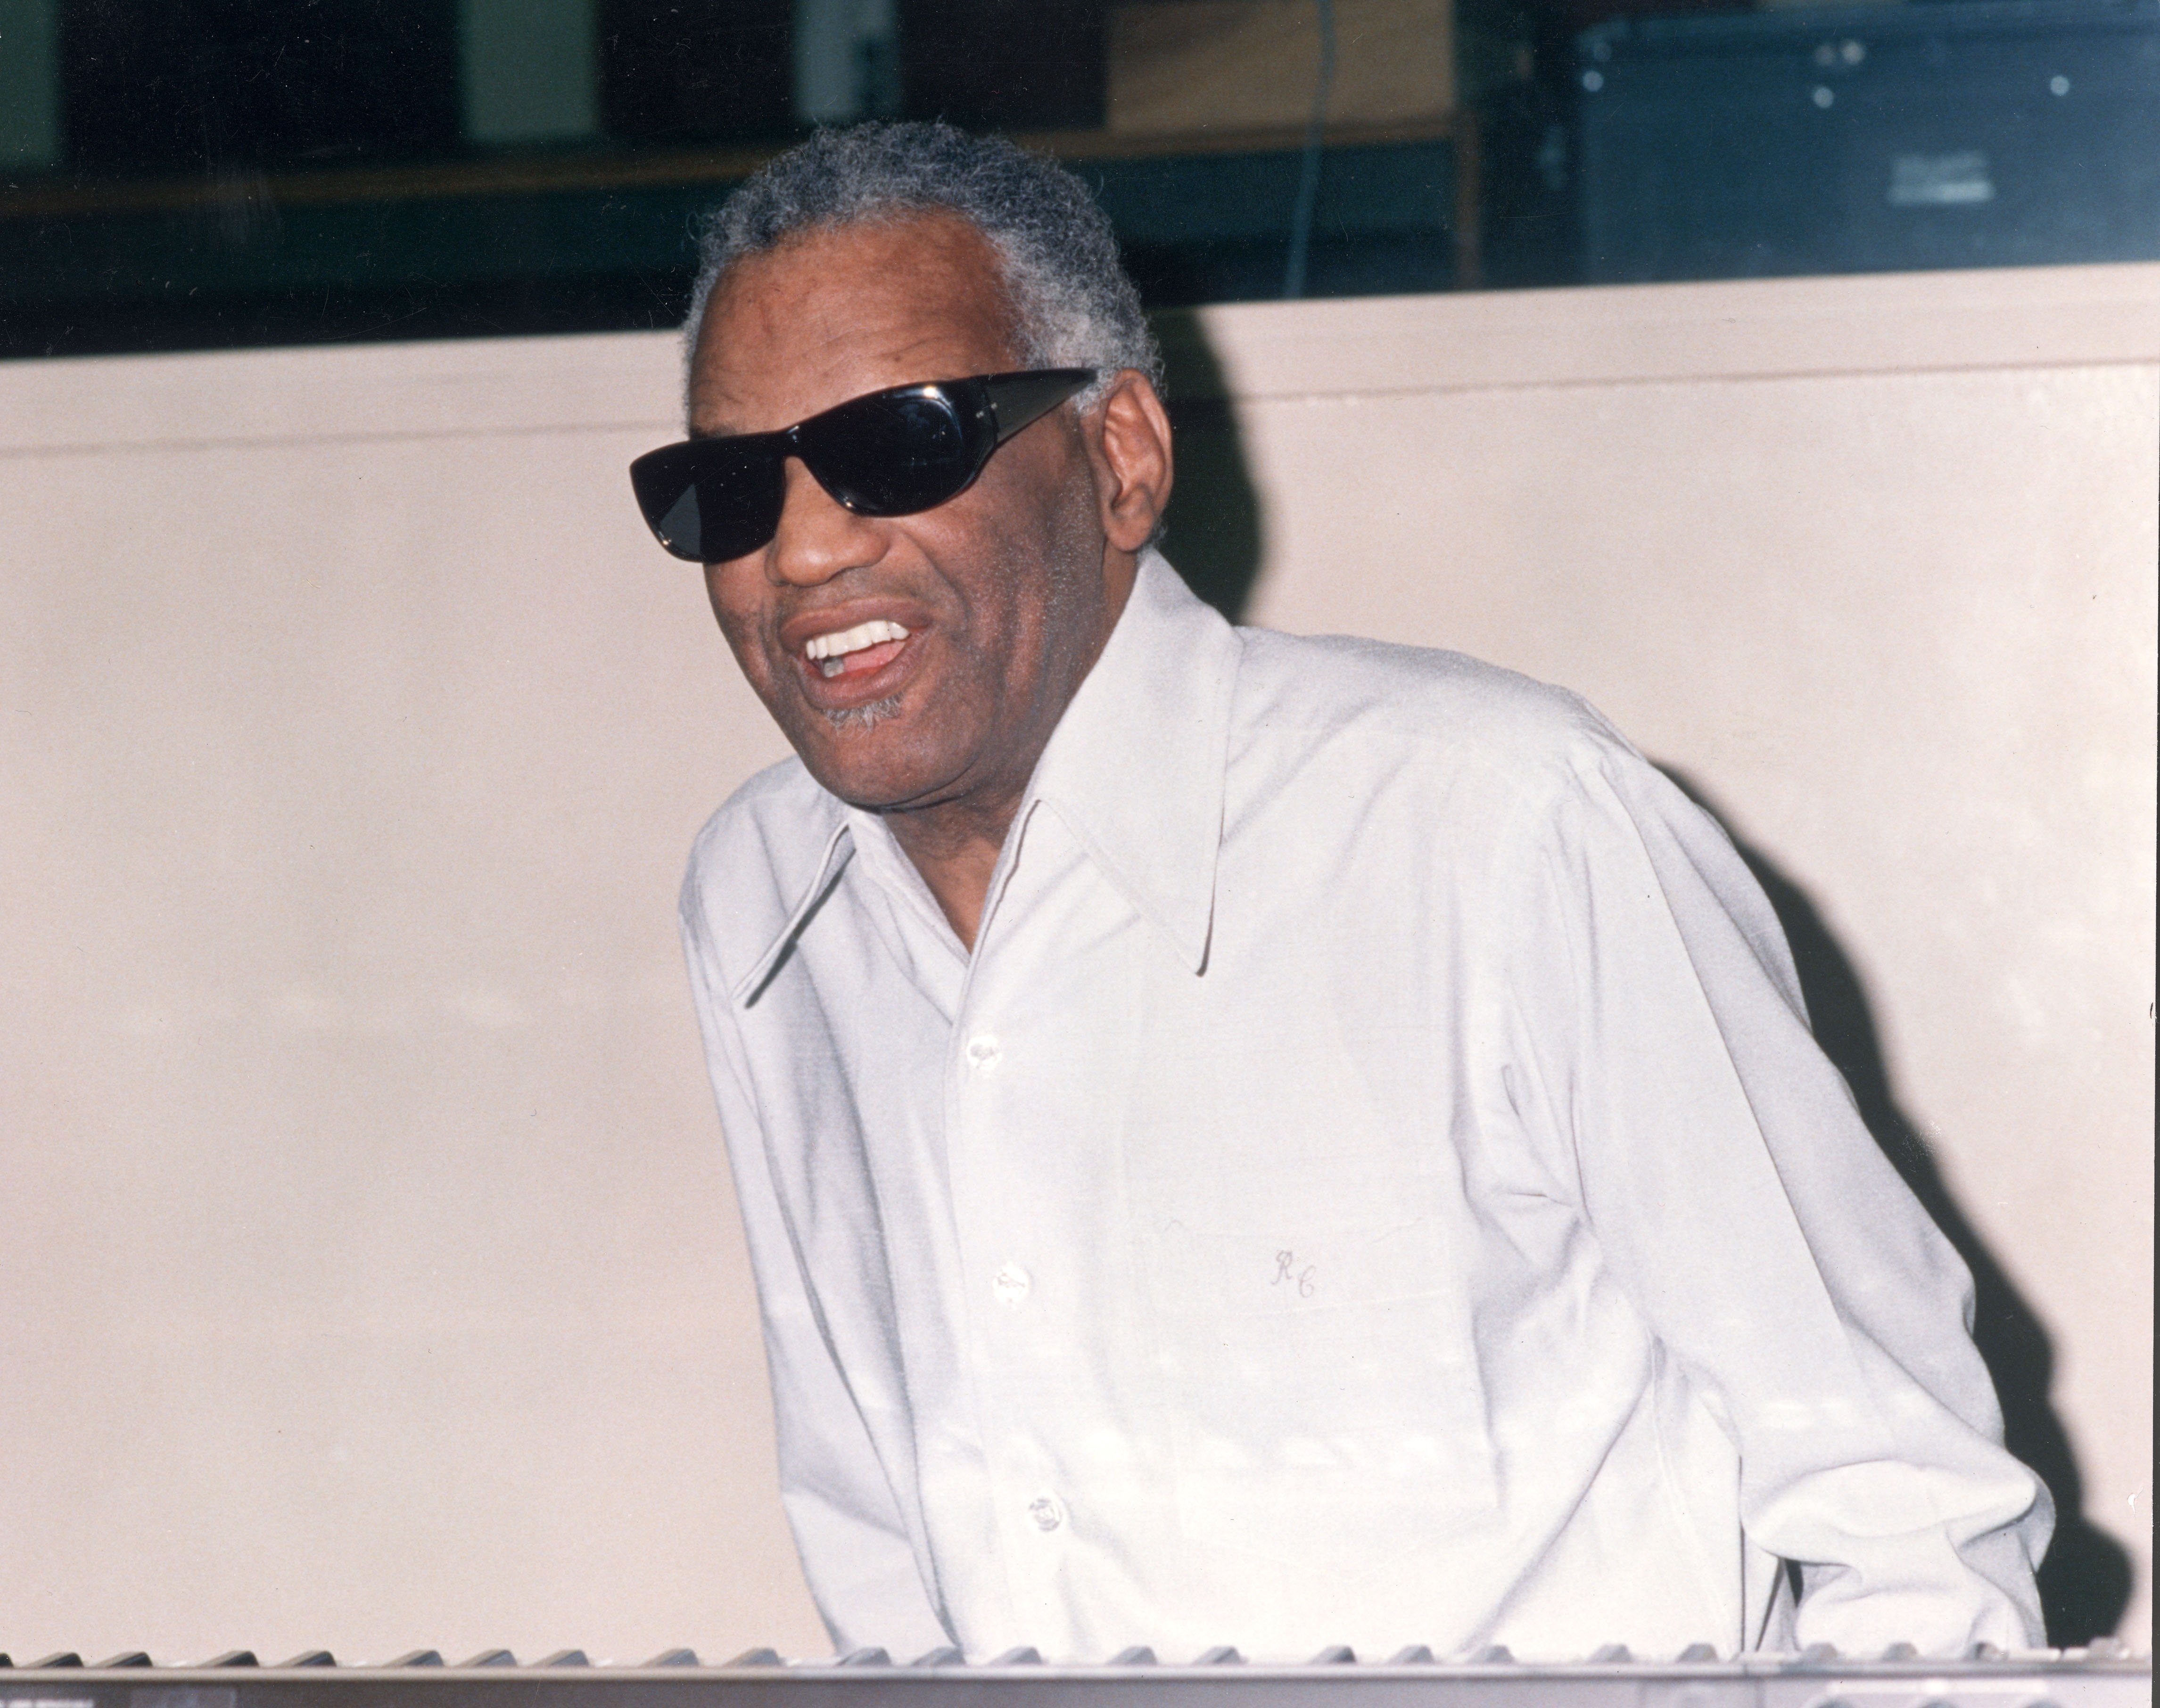 American singer Ray Charles at an unidentified event, circa 1995. | Source: Getty Images